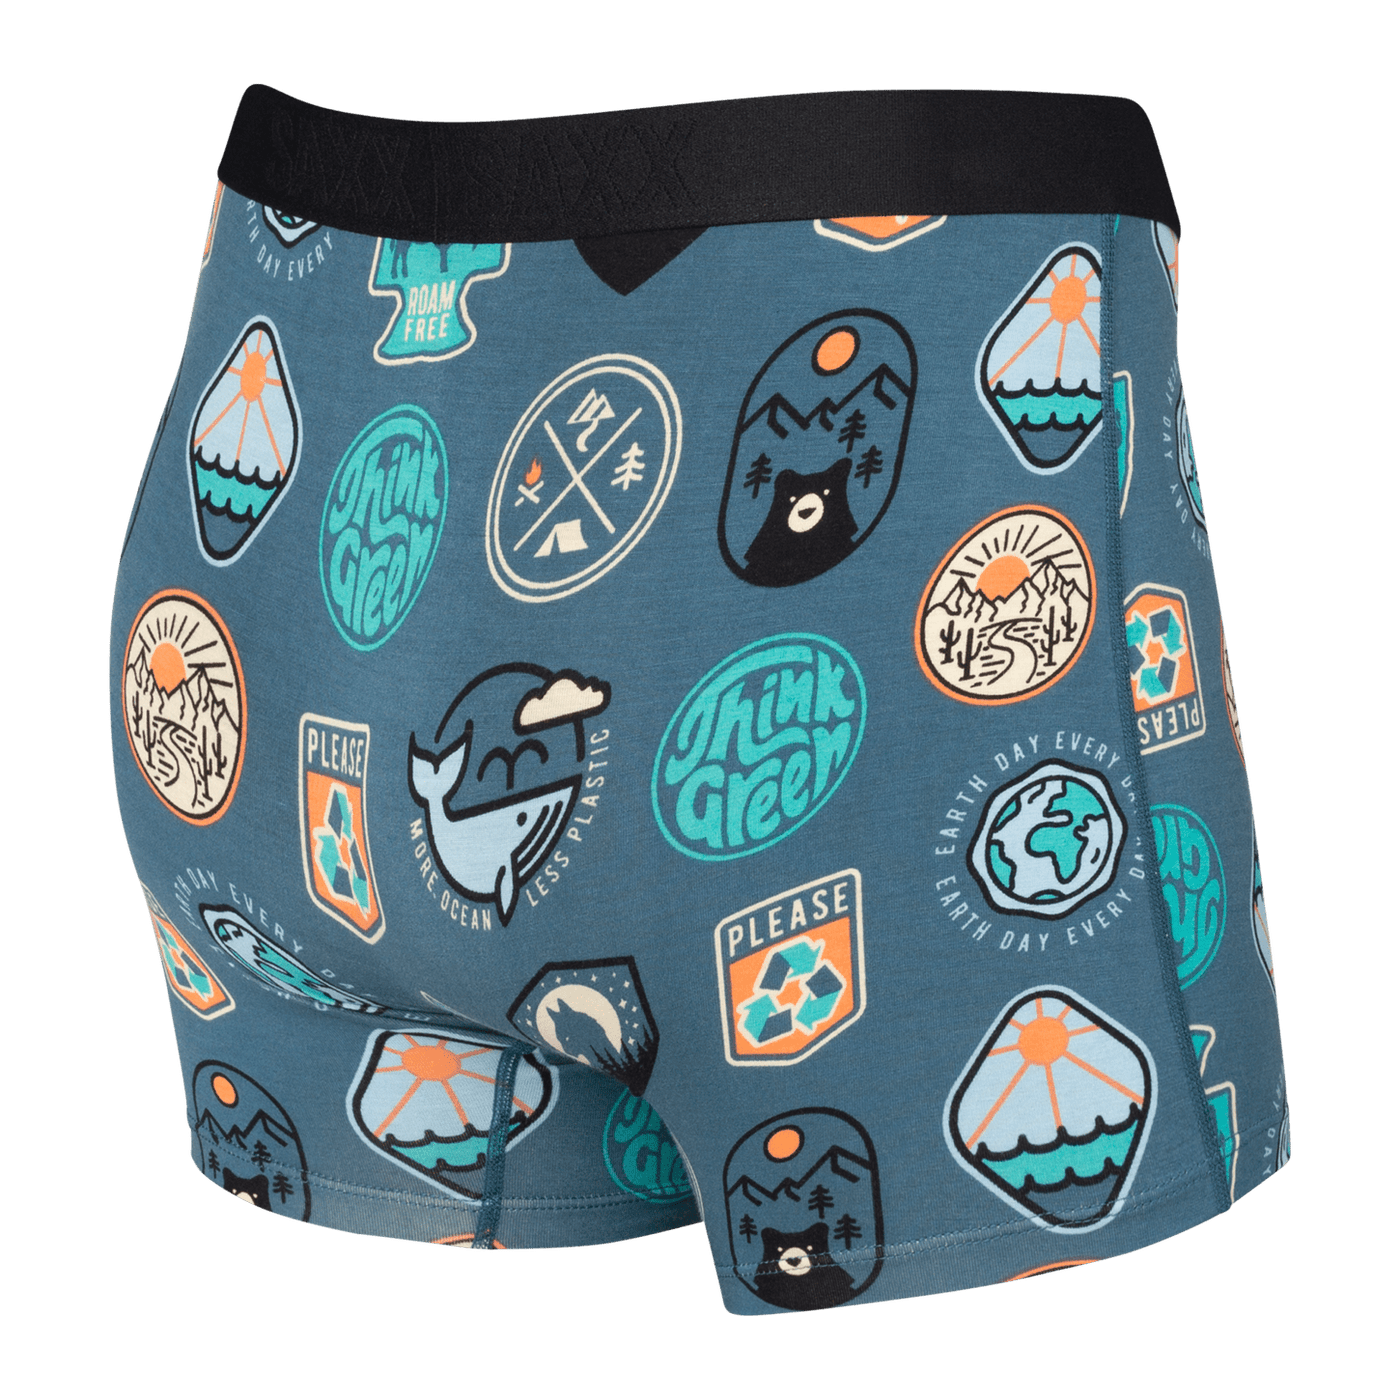 Saxx Vibe Boxers - Navy Everyday is Earthday - The Hockey Shop Source For Sports